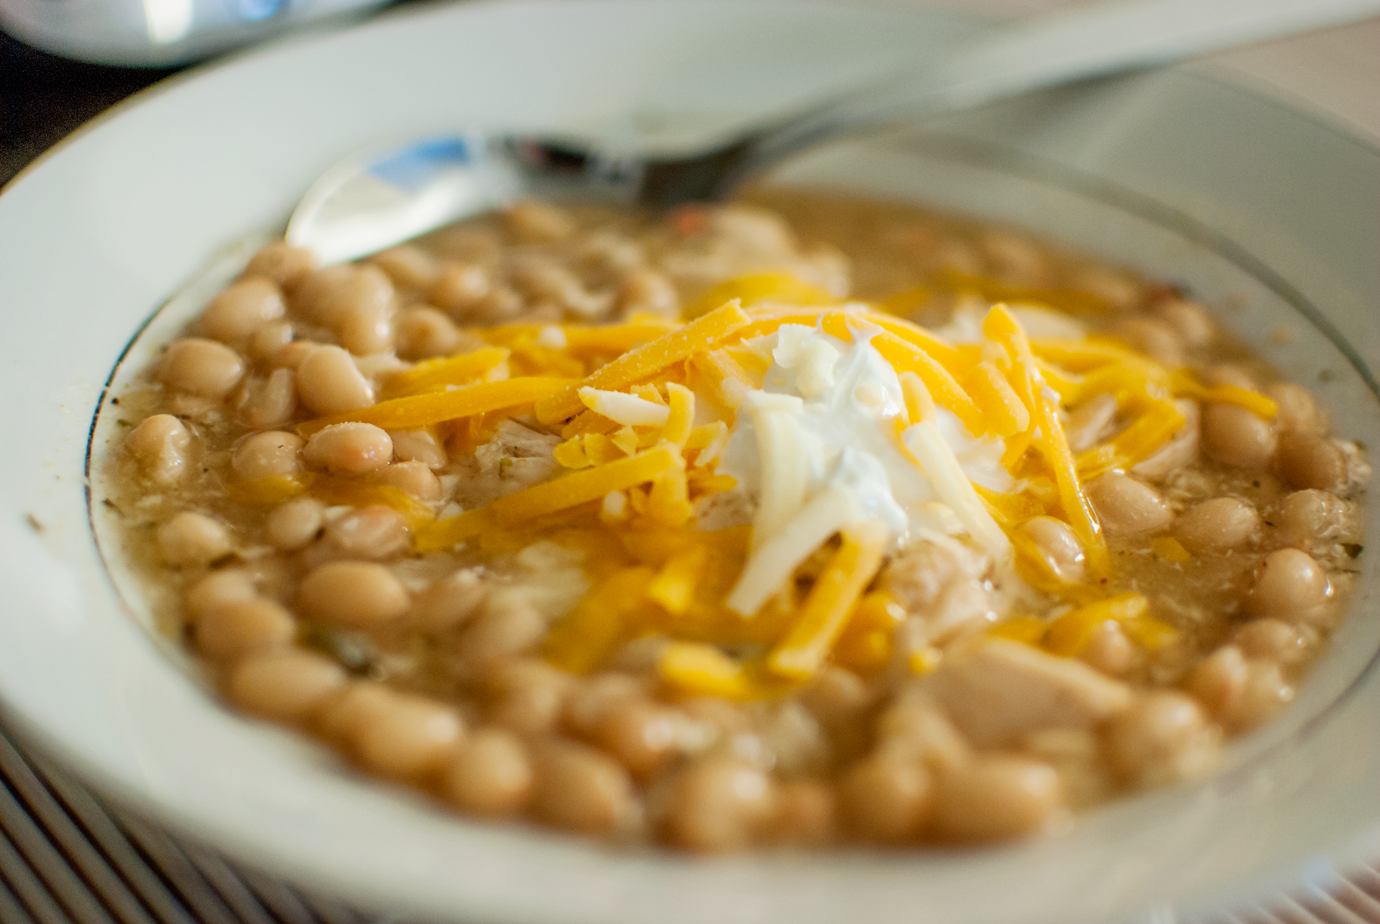 Bowl of White Bean Chicken Chili With Sour Cream and Shredded Cheese